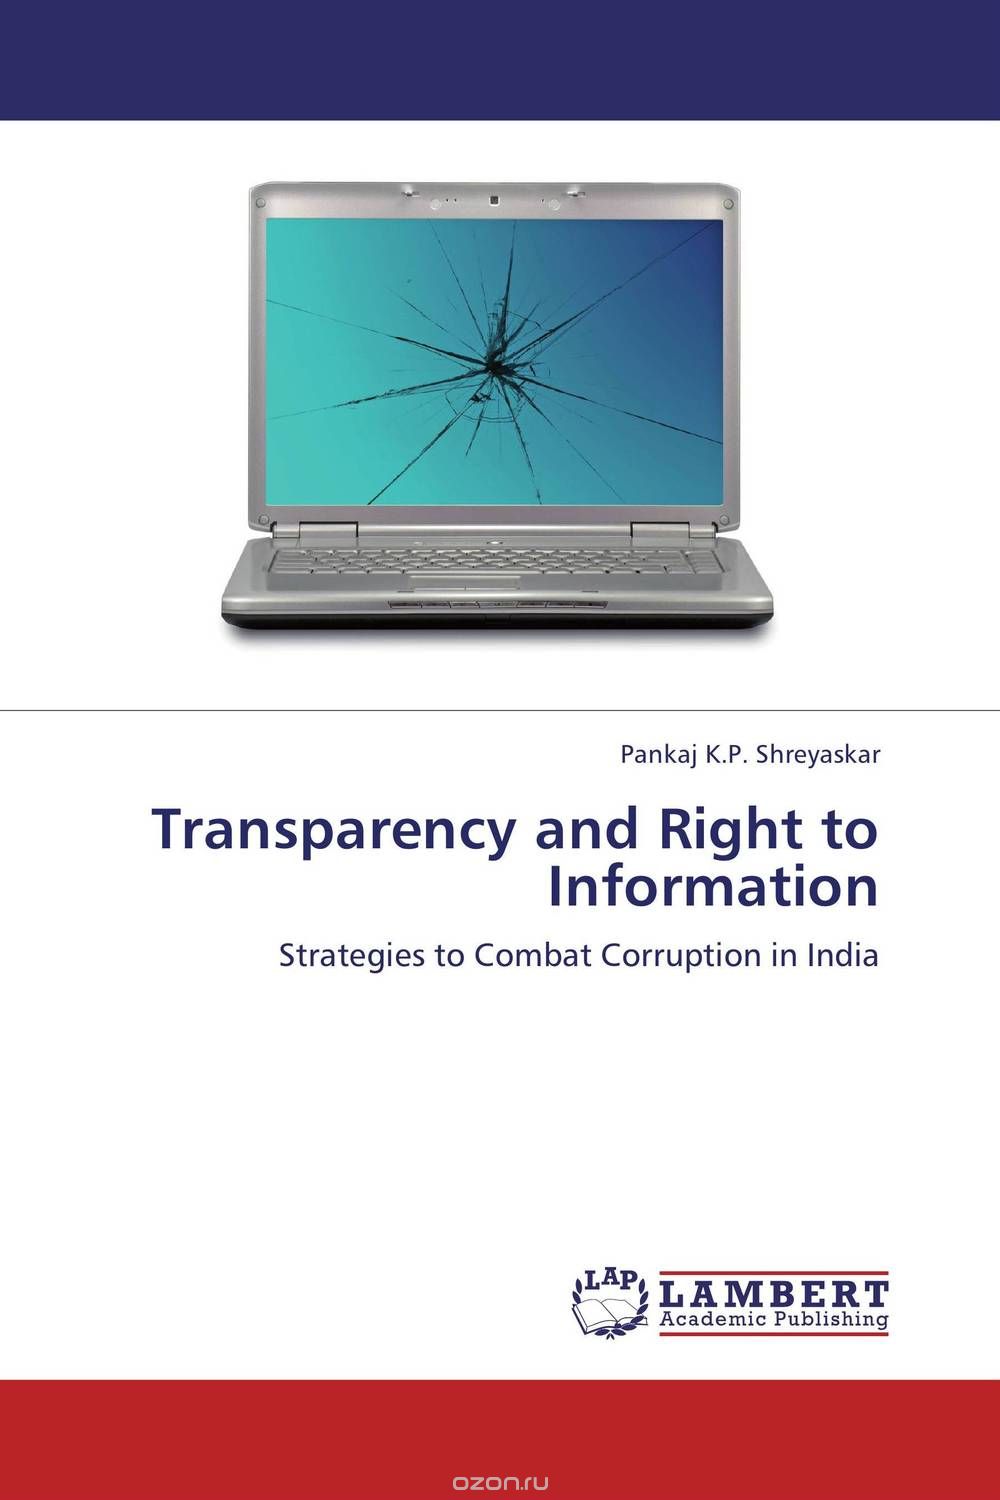 Transparency and Right to Information